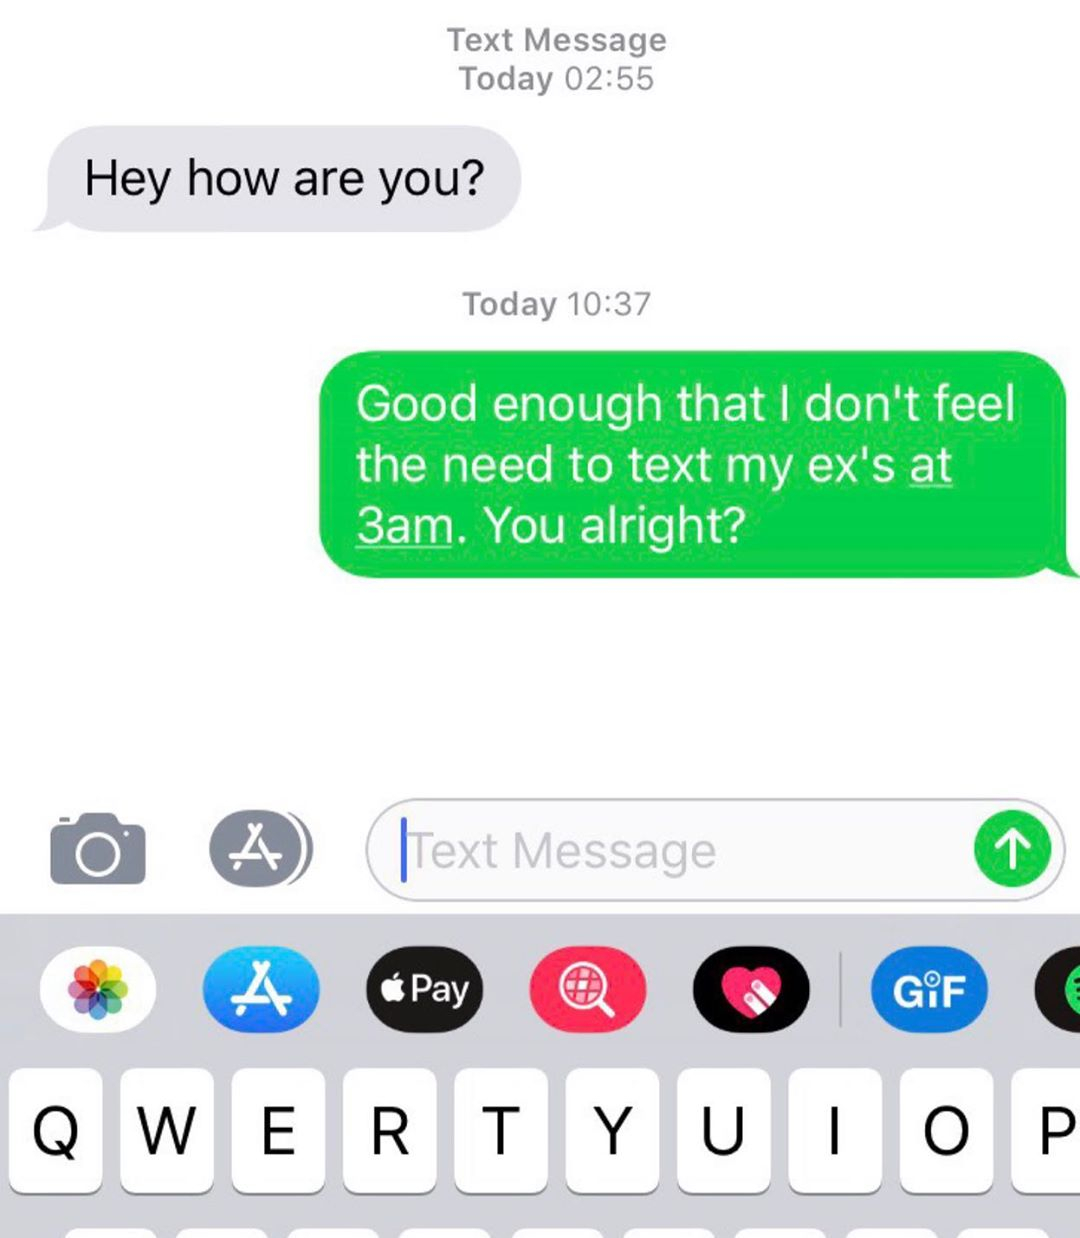 multimedia - Text Message Today Hey how are you? Today Good enough that I don't feel the need to text my ex's at 3am. You alright? A Text Message Pay Gif Qwertyuiop